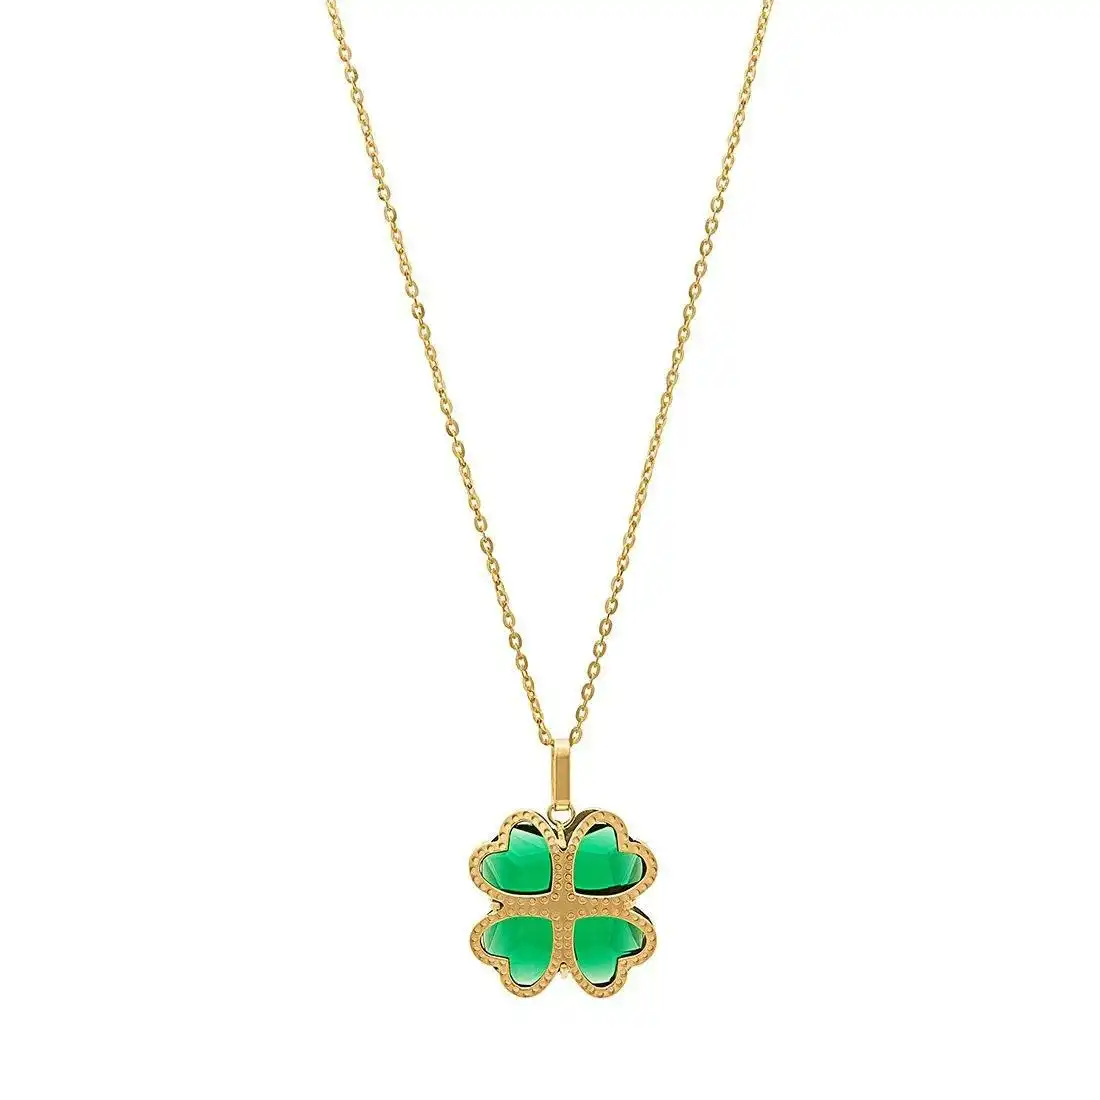 9ct Yellow Gold Silver Infused 4 Leaf Clover Pendant Necklace 45cm